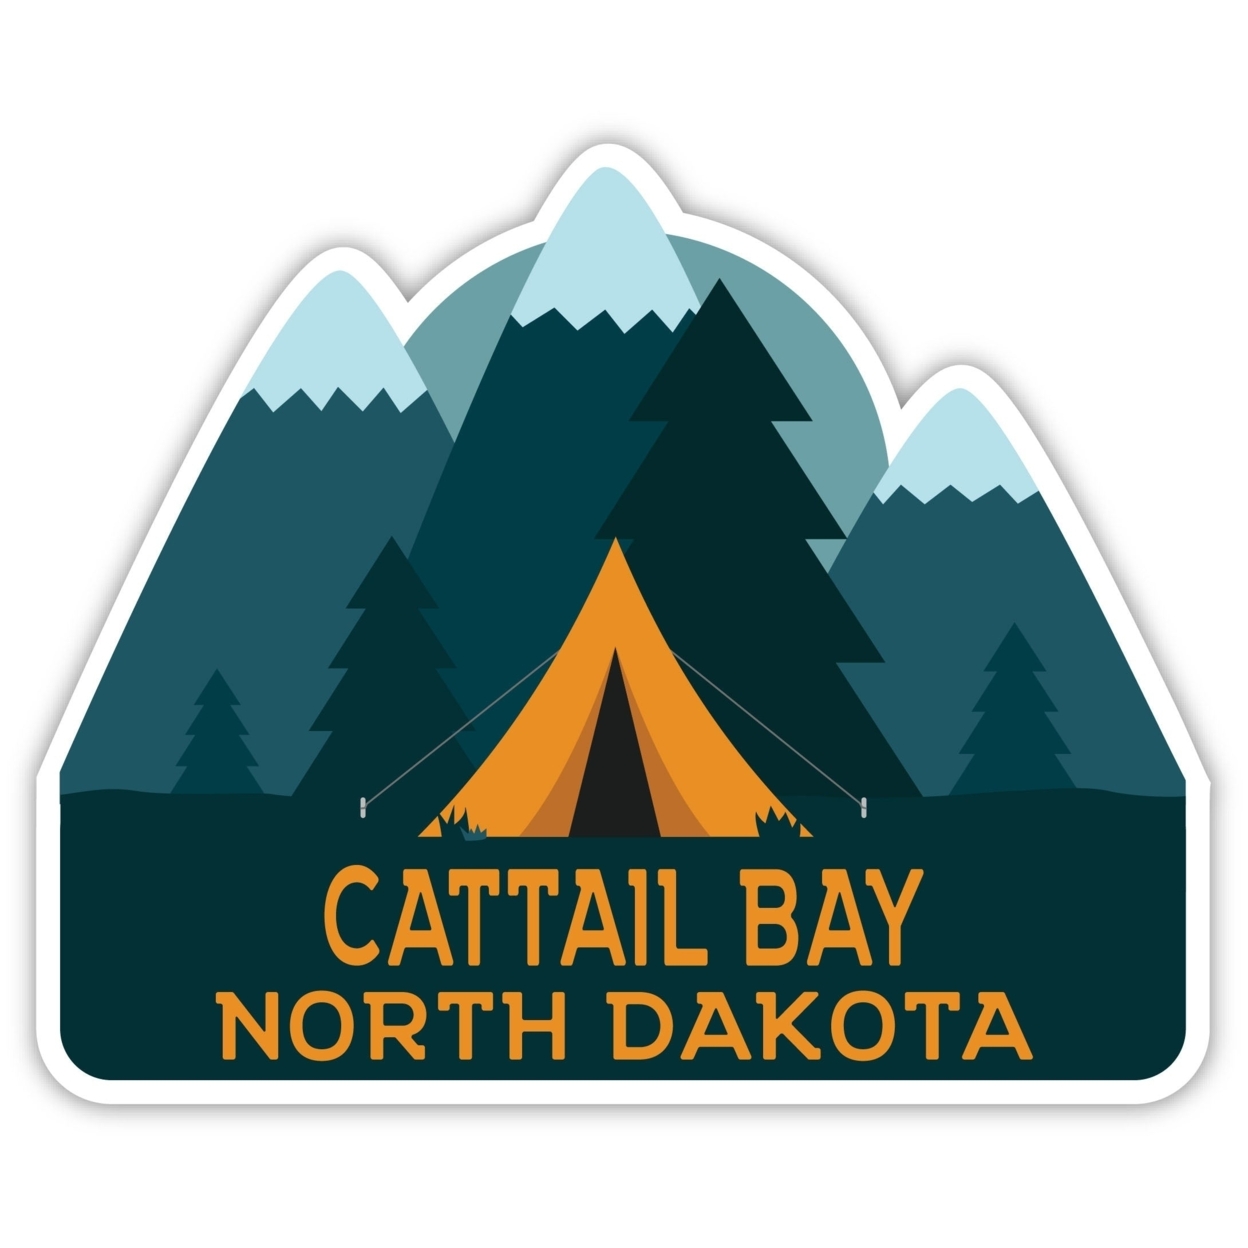 Cattail Bay North Dakota Souvenir Decorative Stickers (Choose Theme And Size) - 4-Pack, 8-Inch, Tent